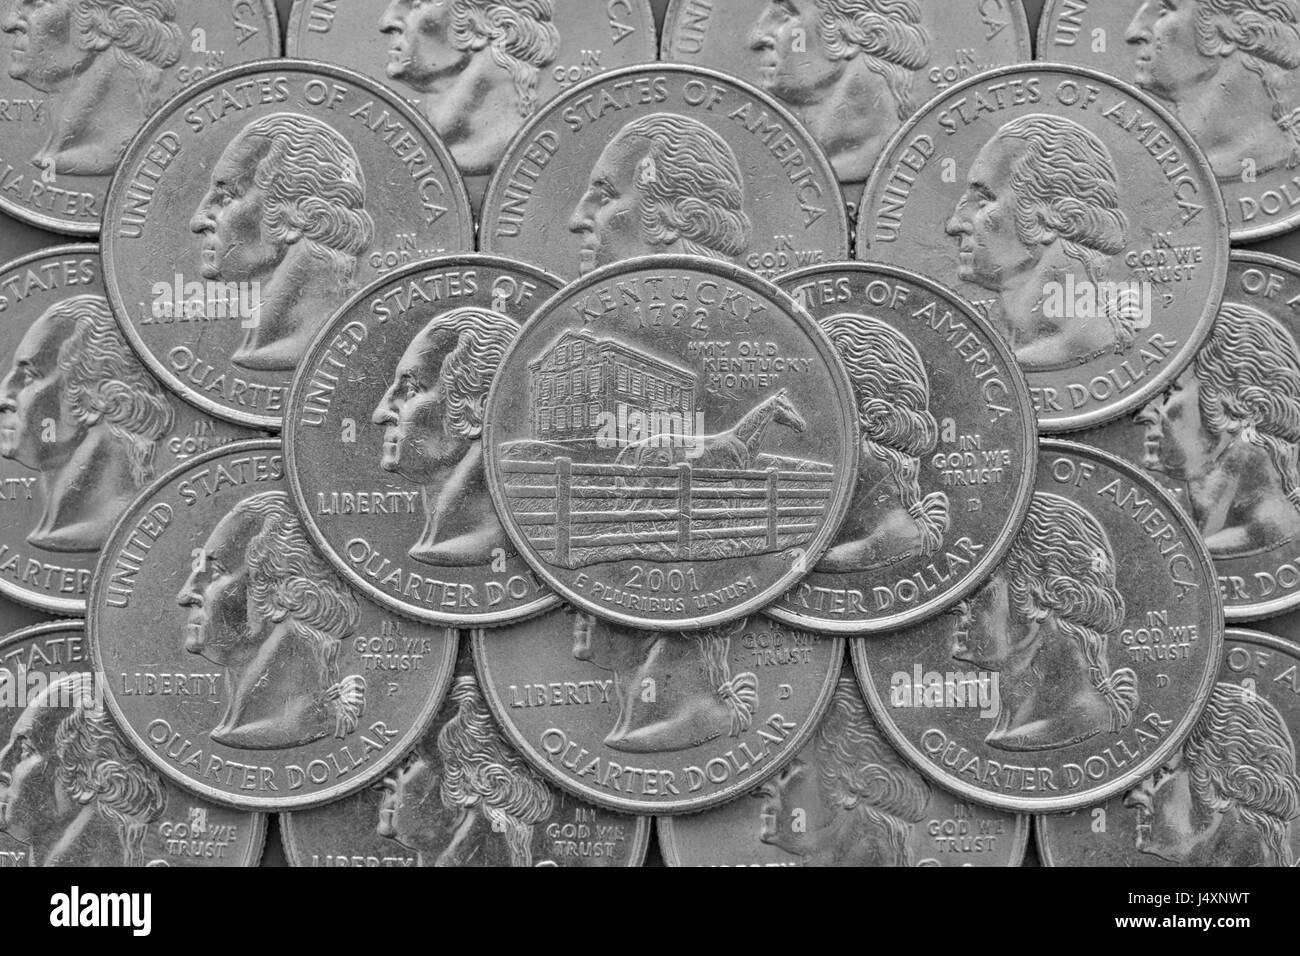 Kentucky State and coins of USA. Pile of the US quarter coins with George Washington and on the top a quarter of Kentucky State. Stock Photo